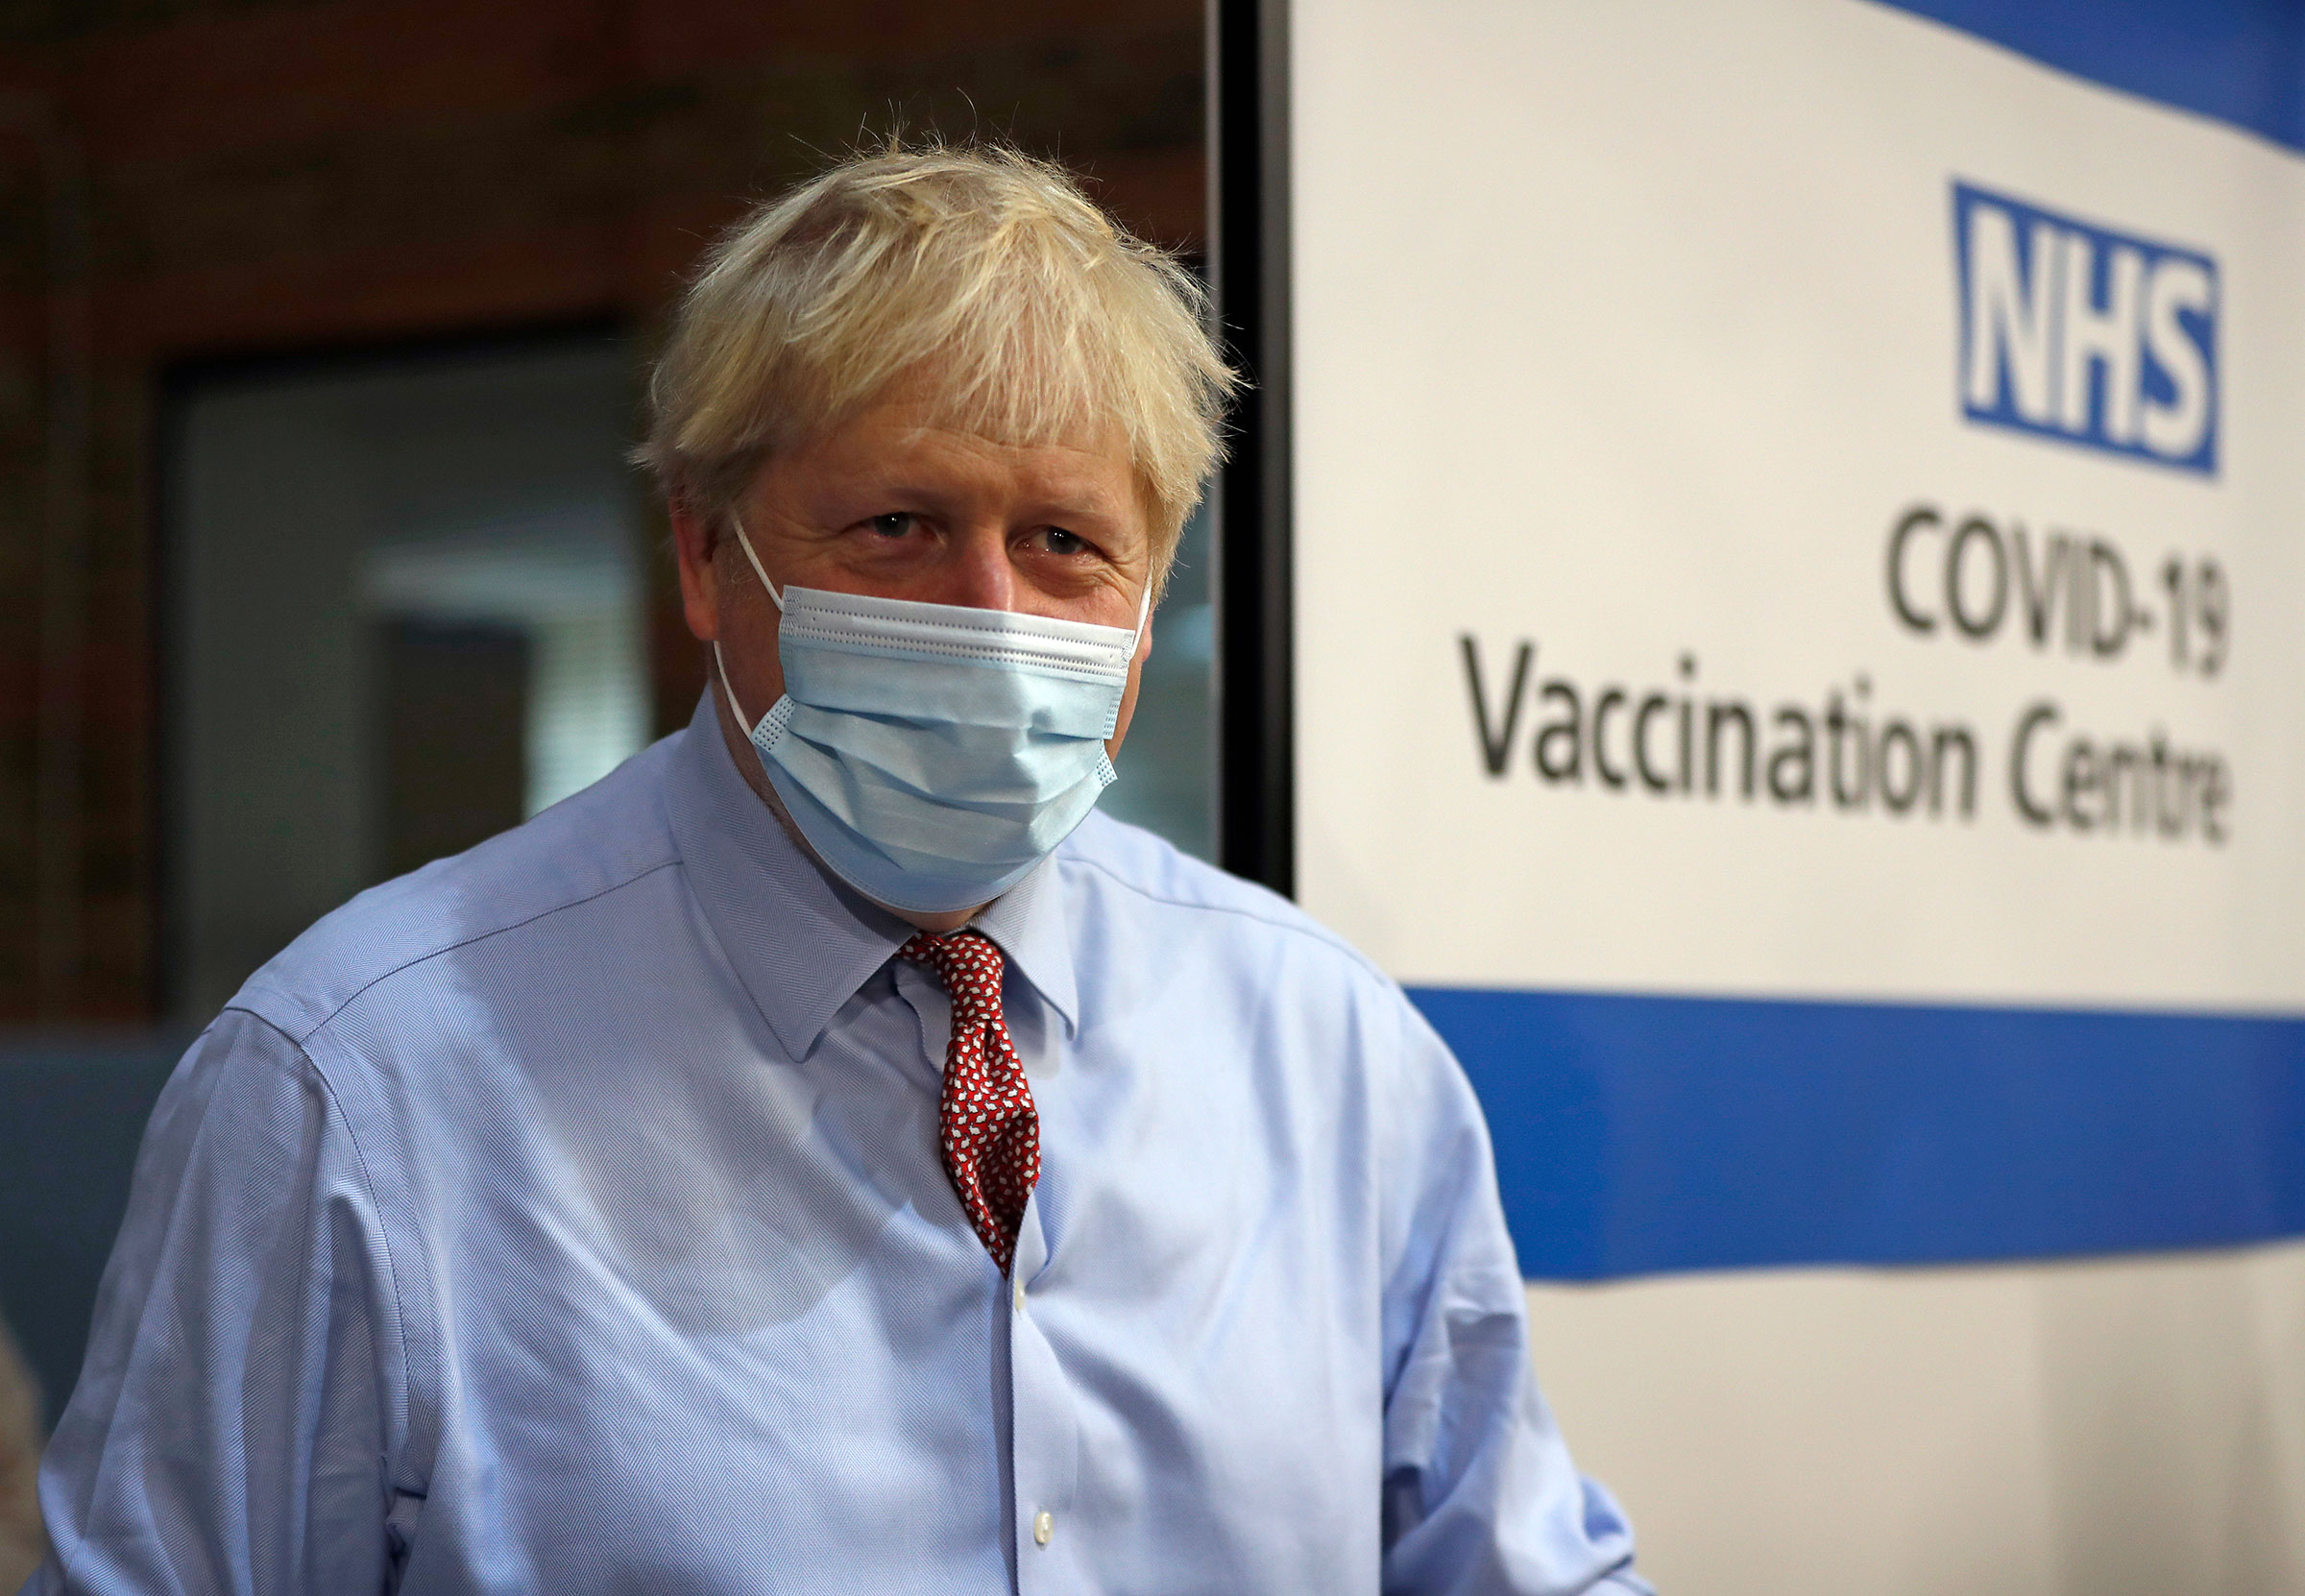 Britain “can’t afford to relax now,” PM says during visit to newly-opened London vaccine center